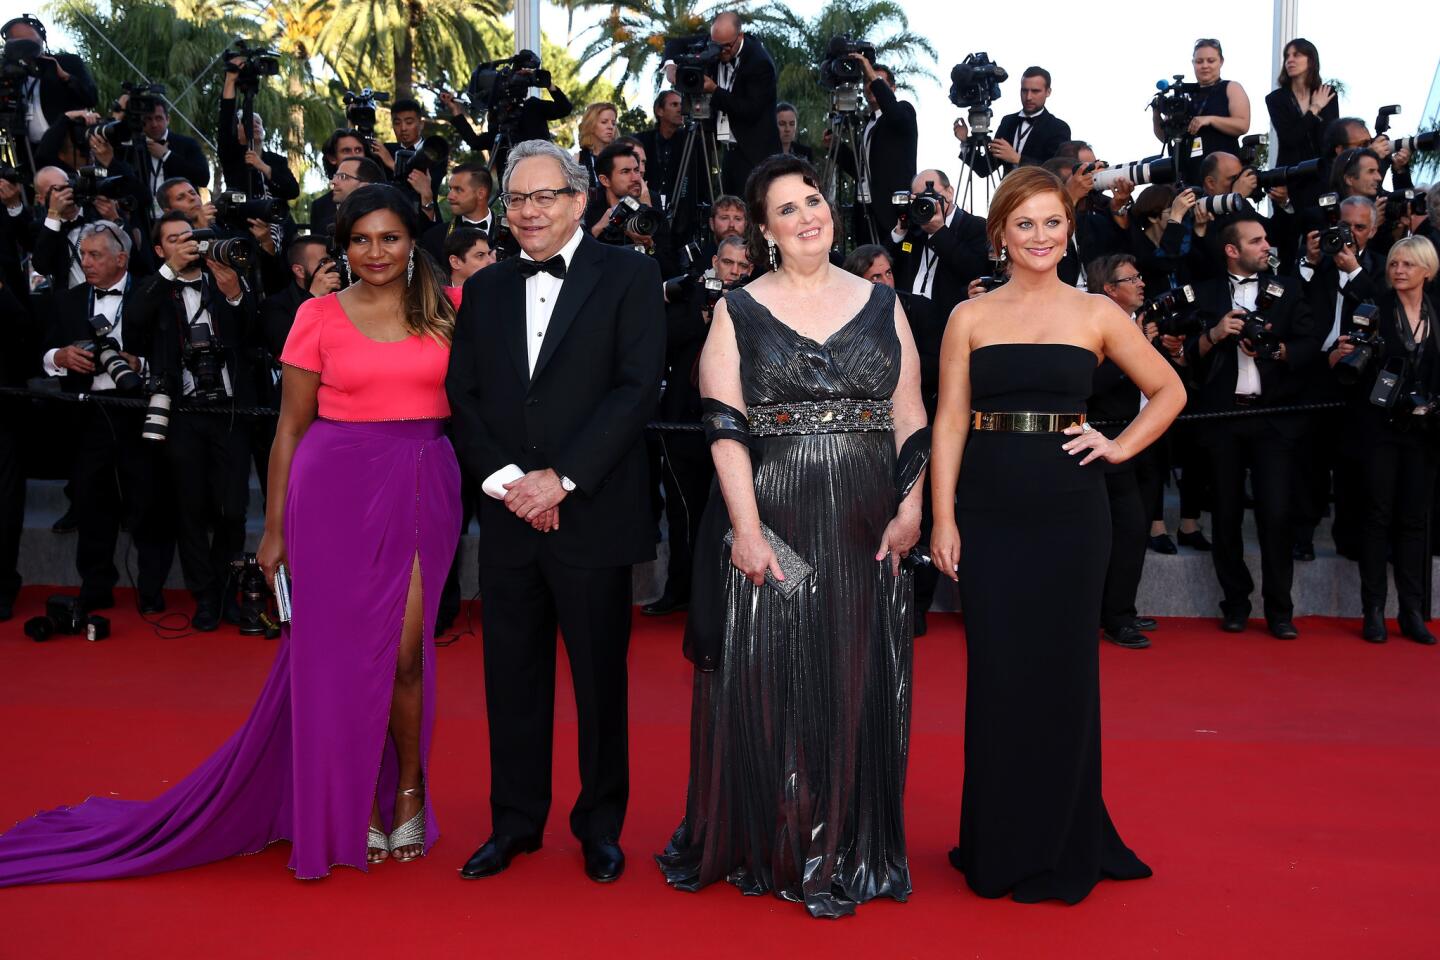 Cannes 2015 | Mindy Kaling, Lewis Black, Phyllis Smith and Amy Poehler